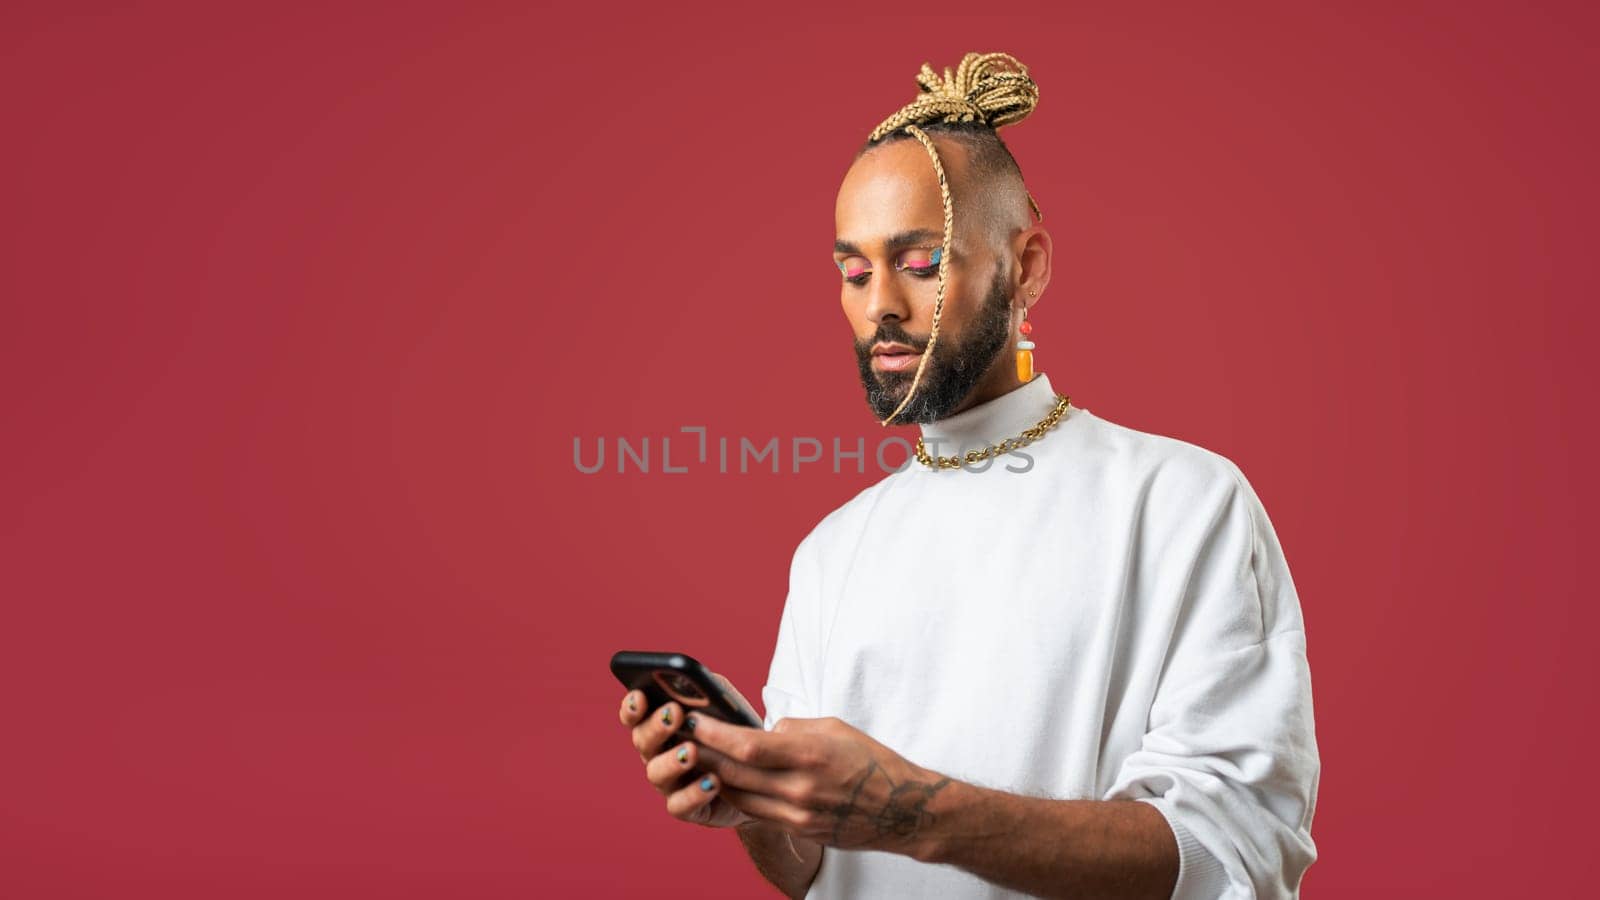 Trendy black latin gay man in white clothes use smartphone on red background studio portrait People lifestyle fashion lgbtq concept